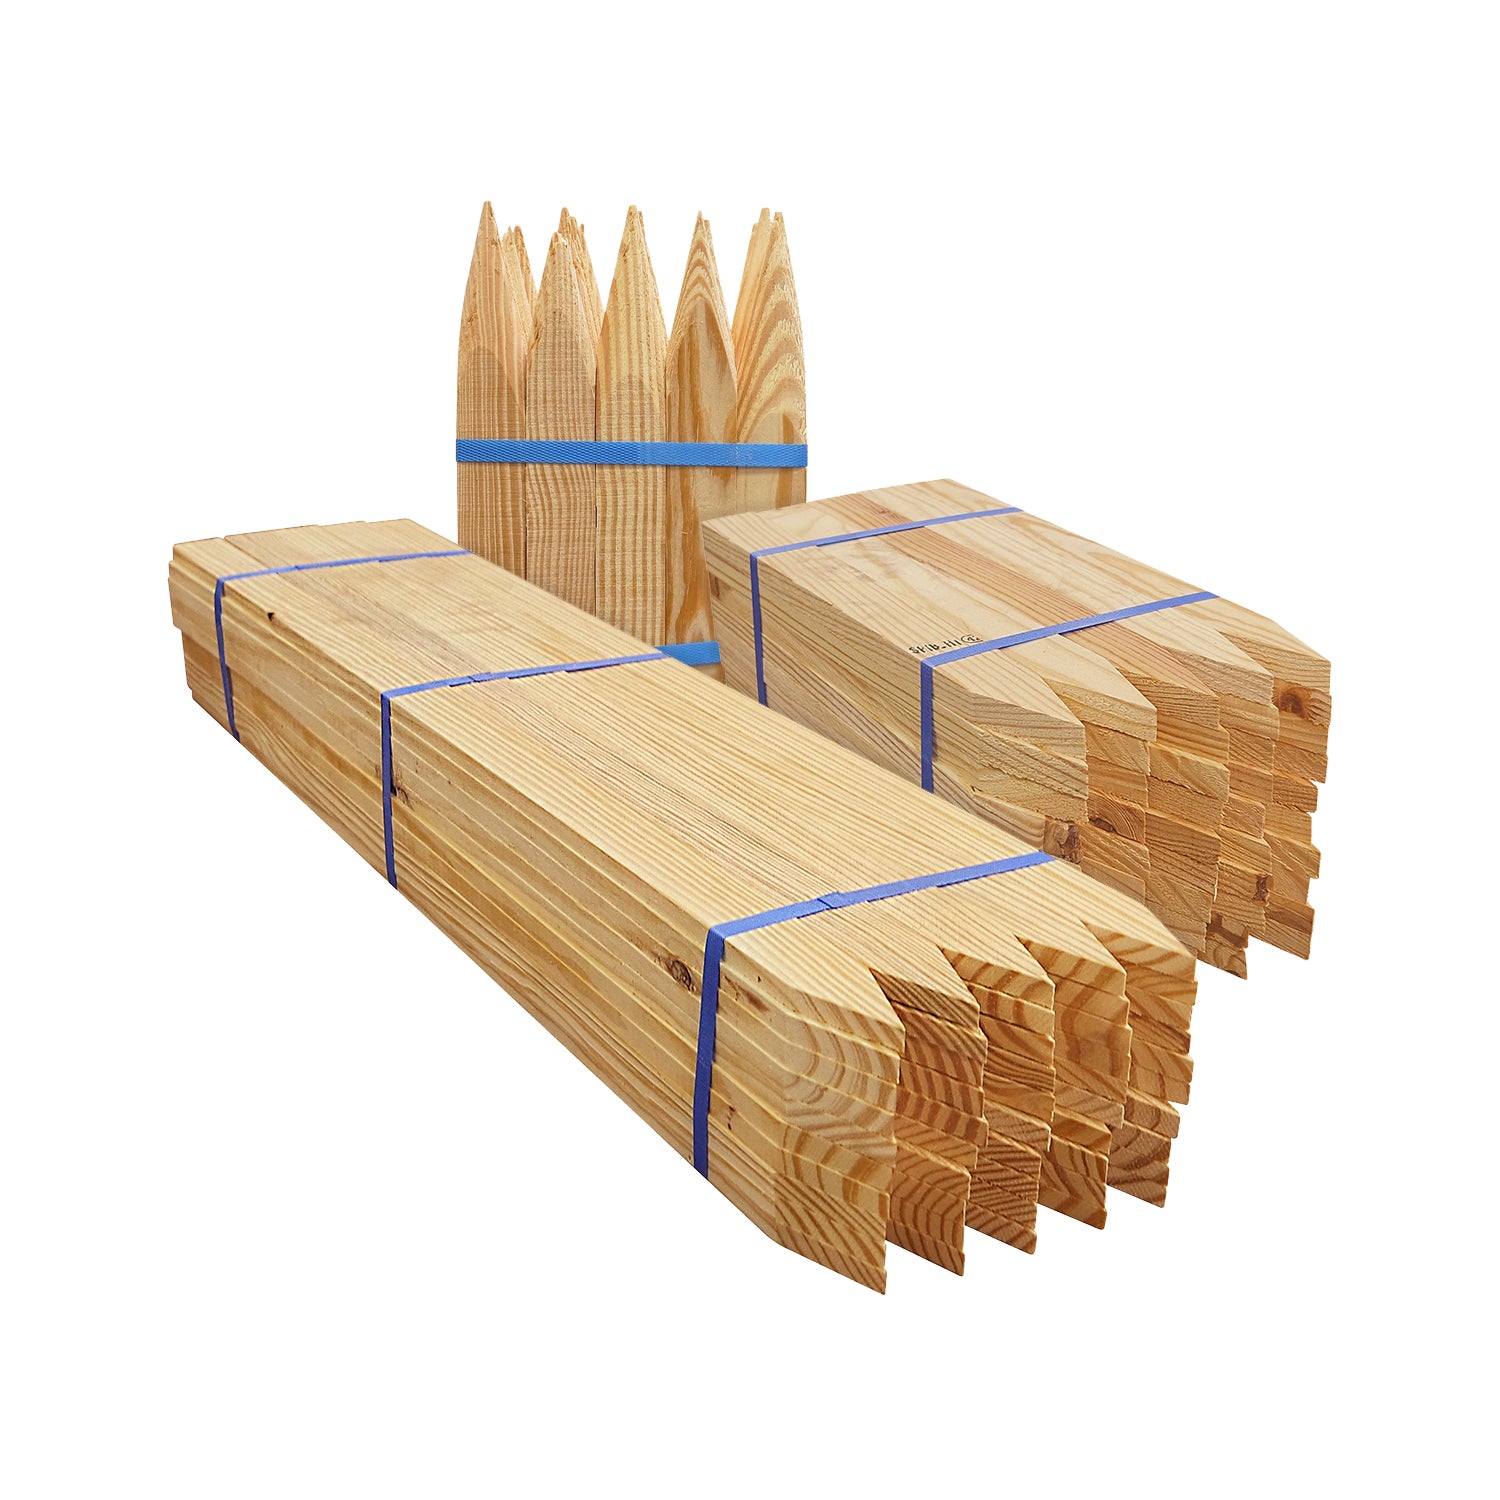 Wood stakes, lathes, hubs